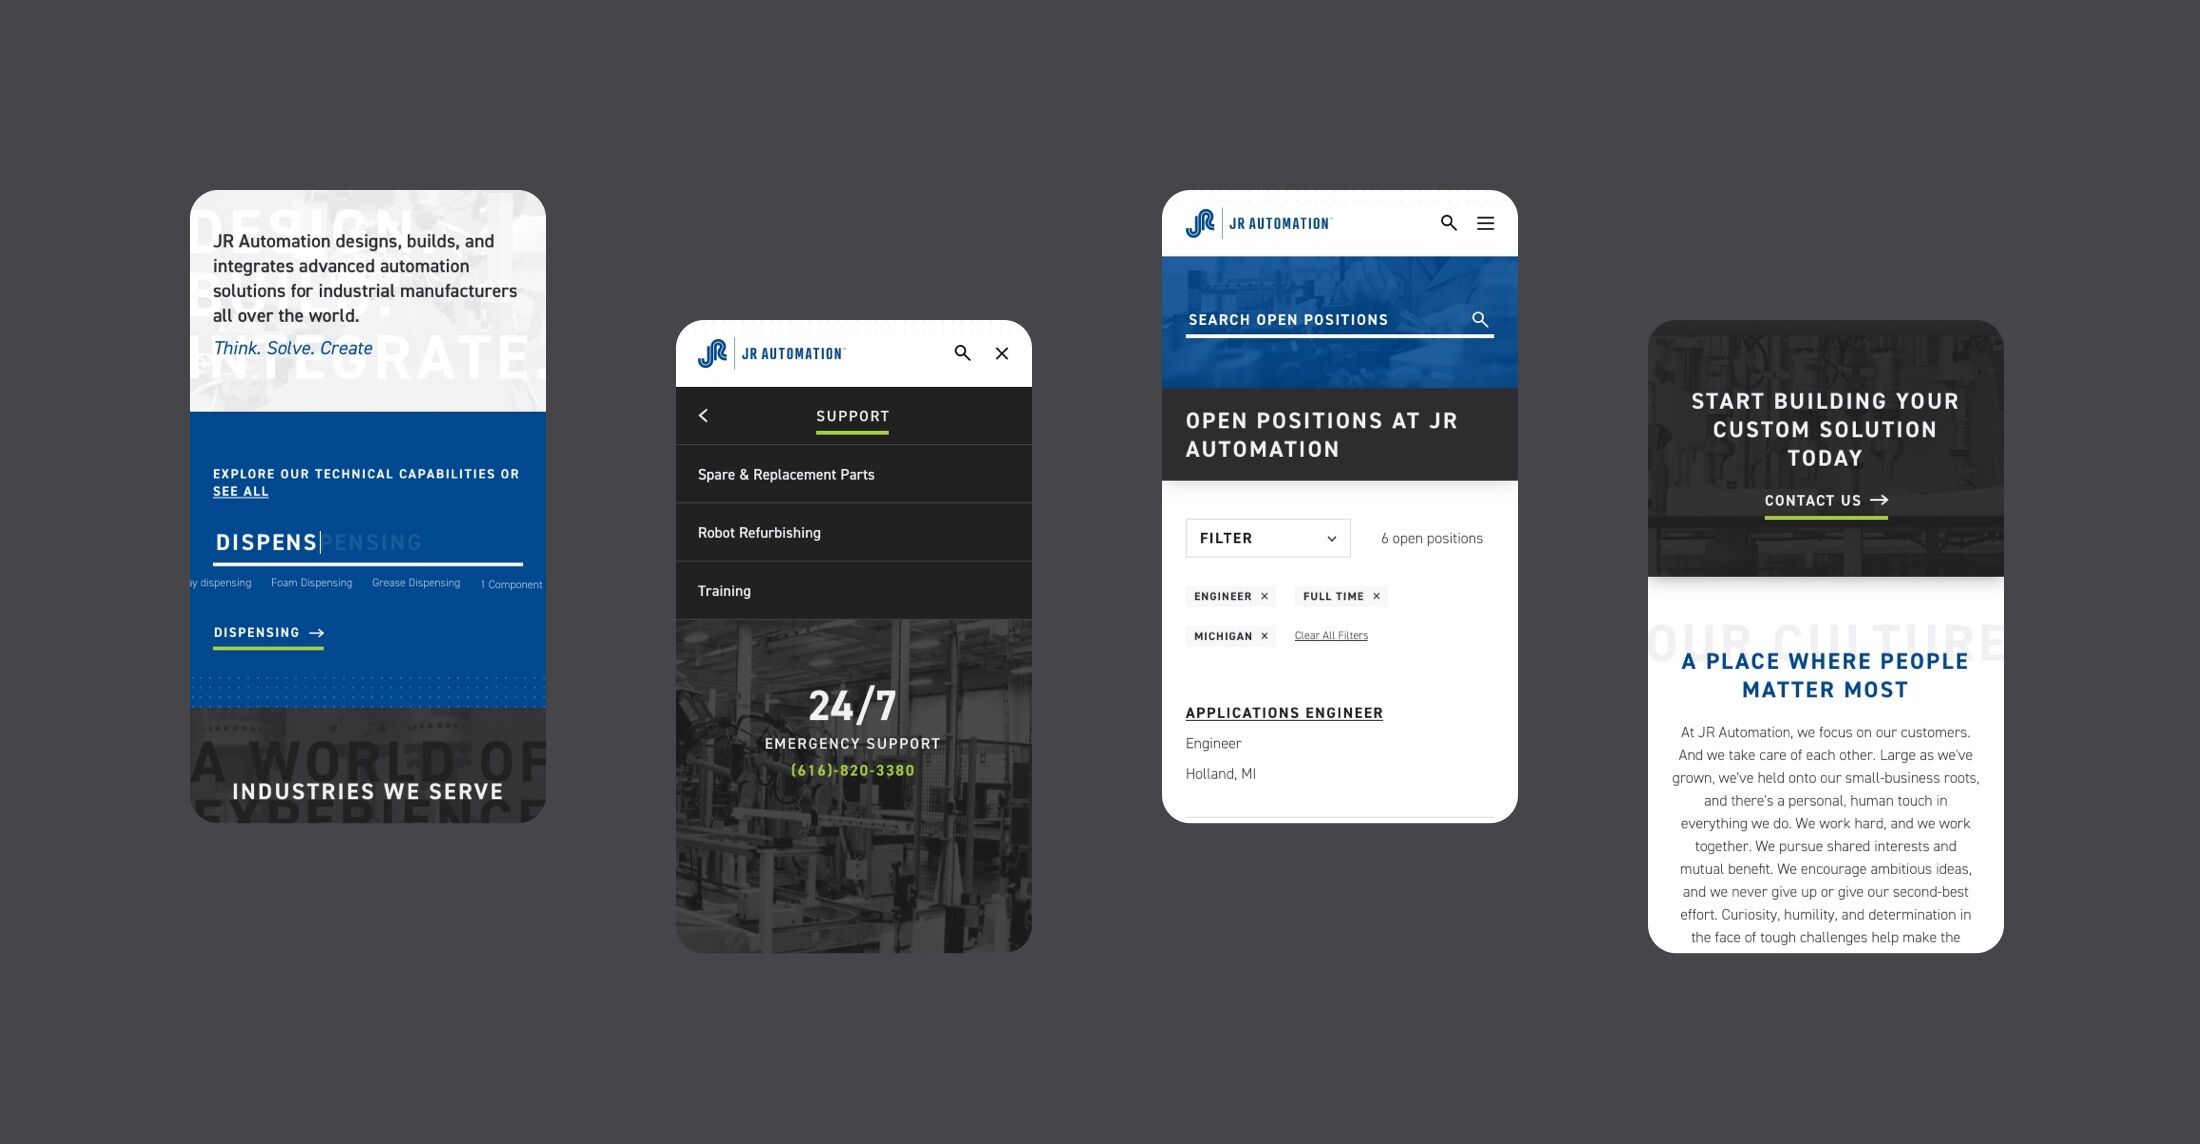 Several mobile mockups from the JR Automation site